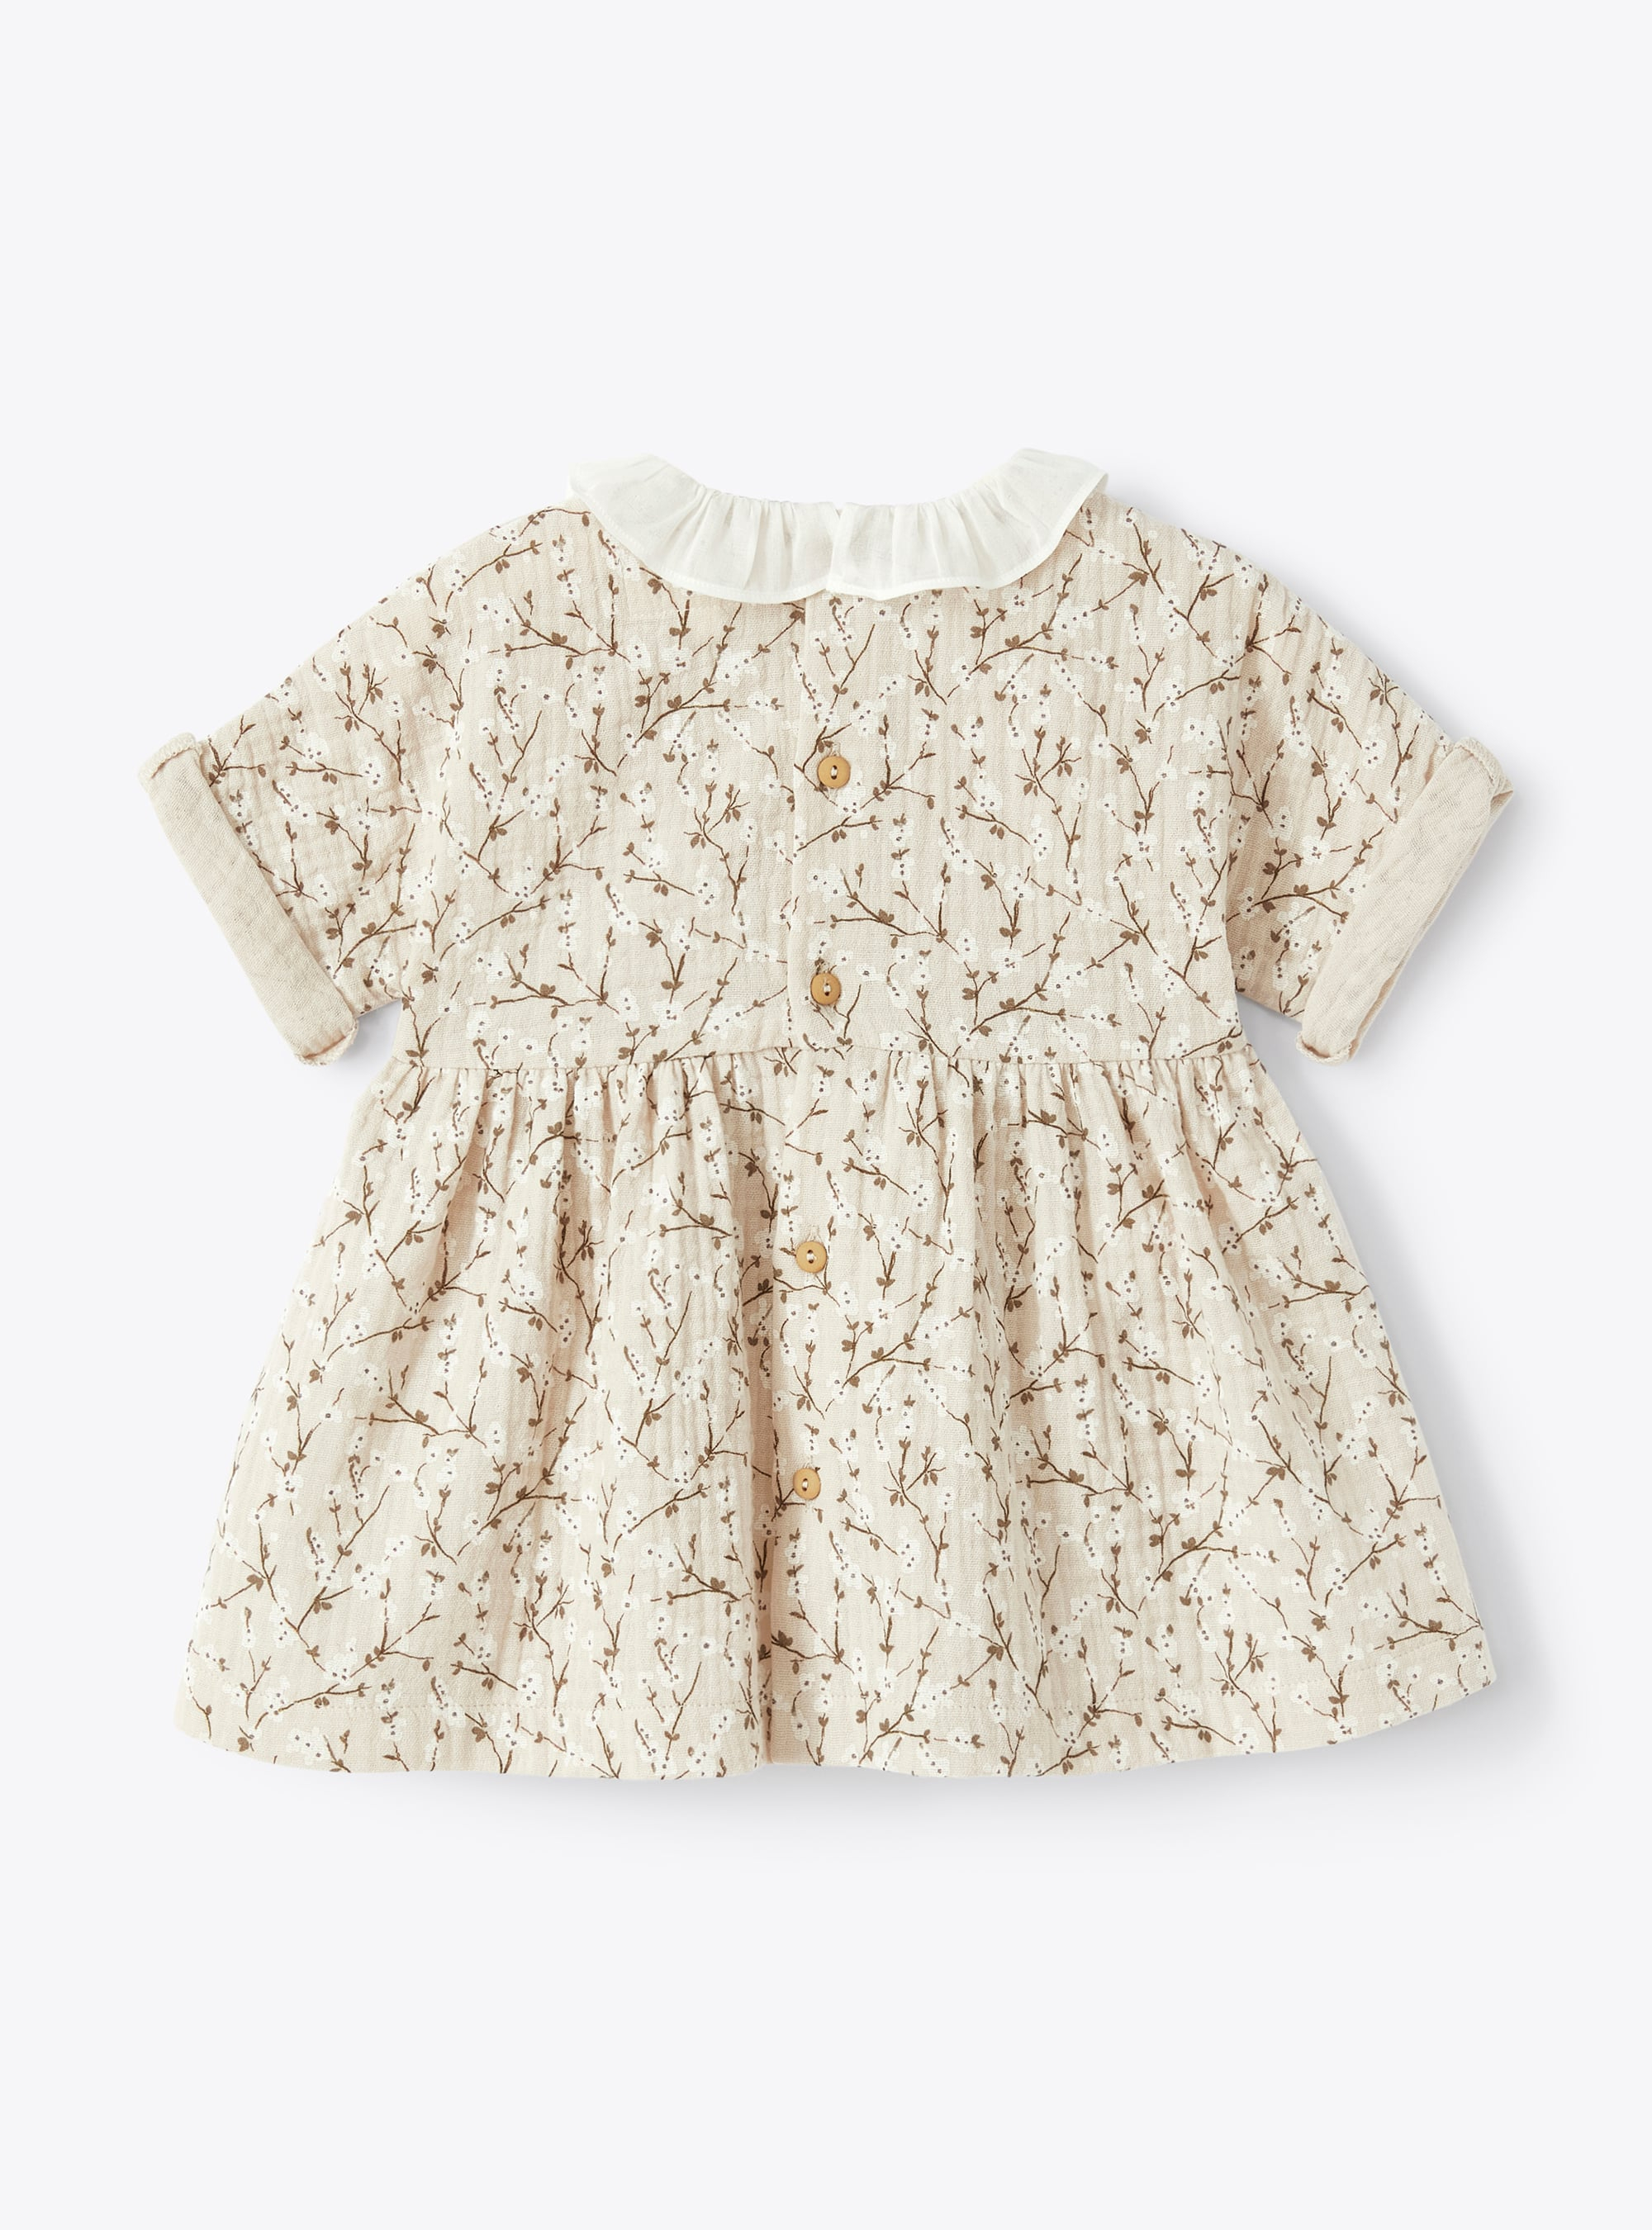 Dress in floral-patterned cotton gauze - Brown | Il Gufo